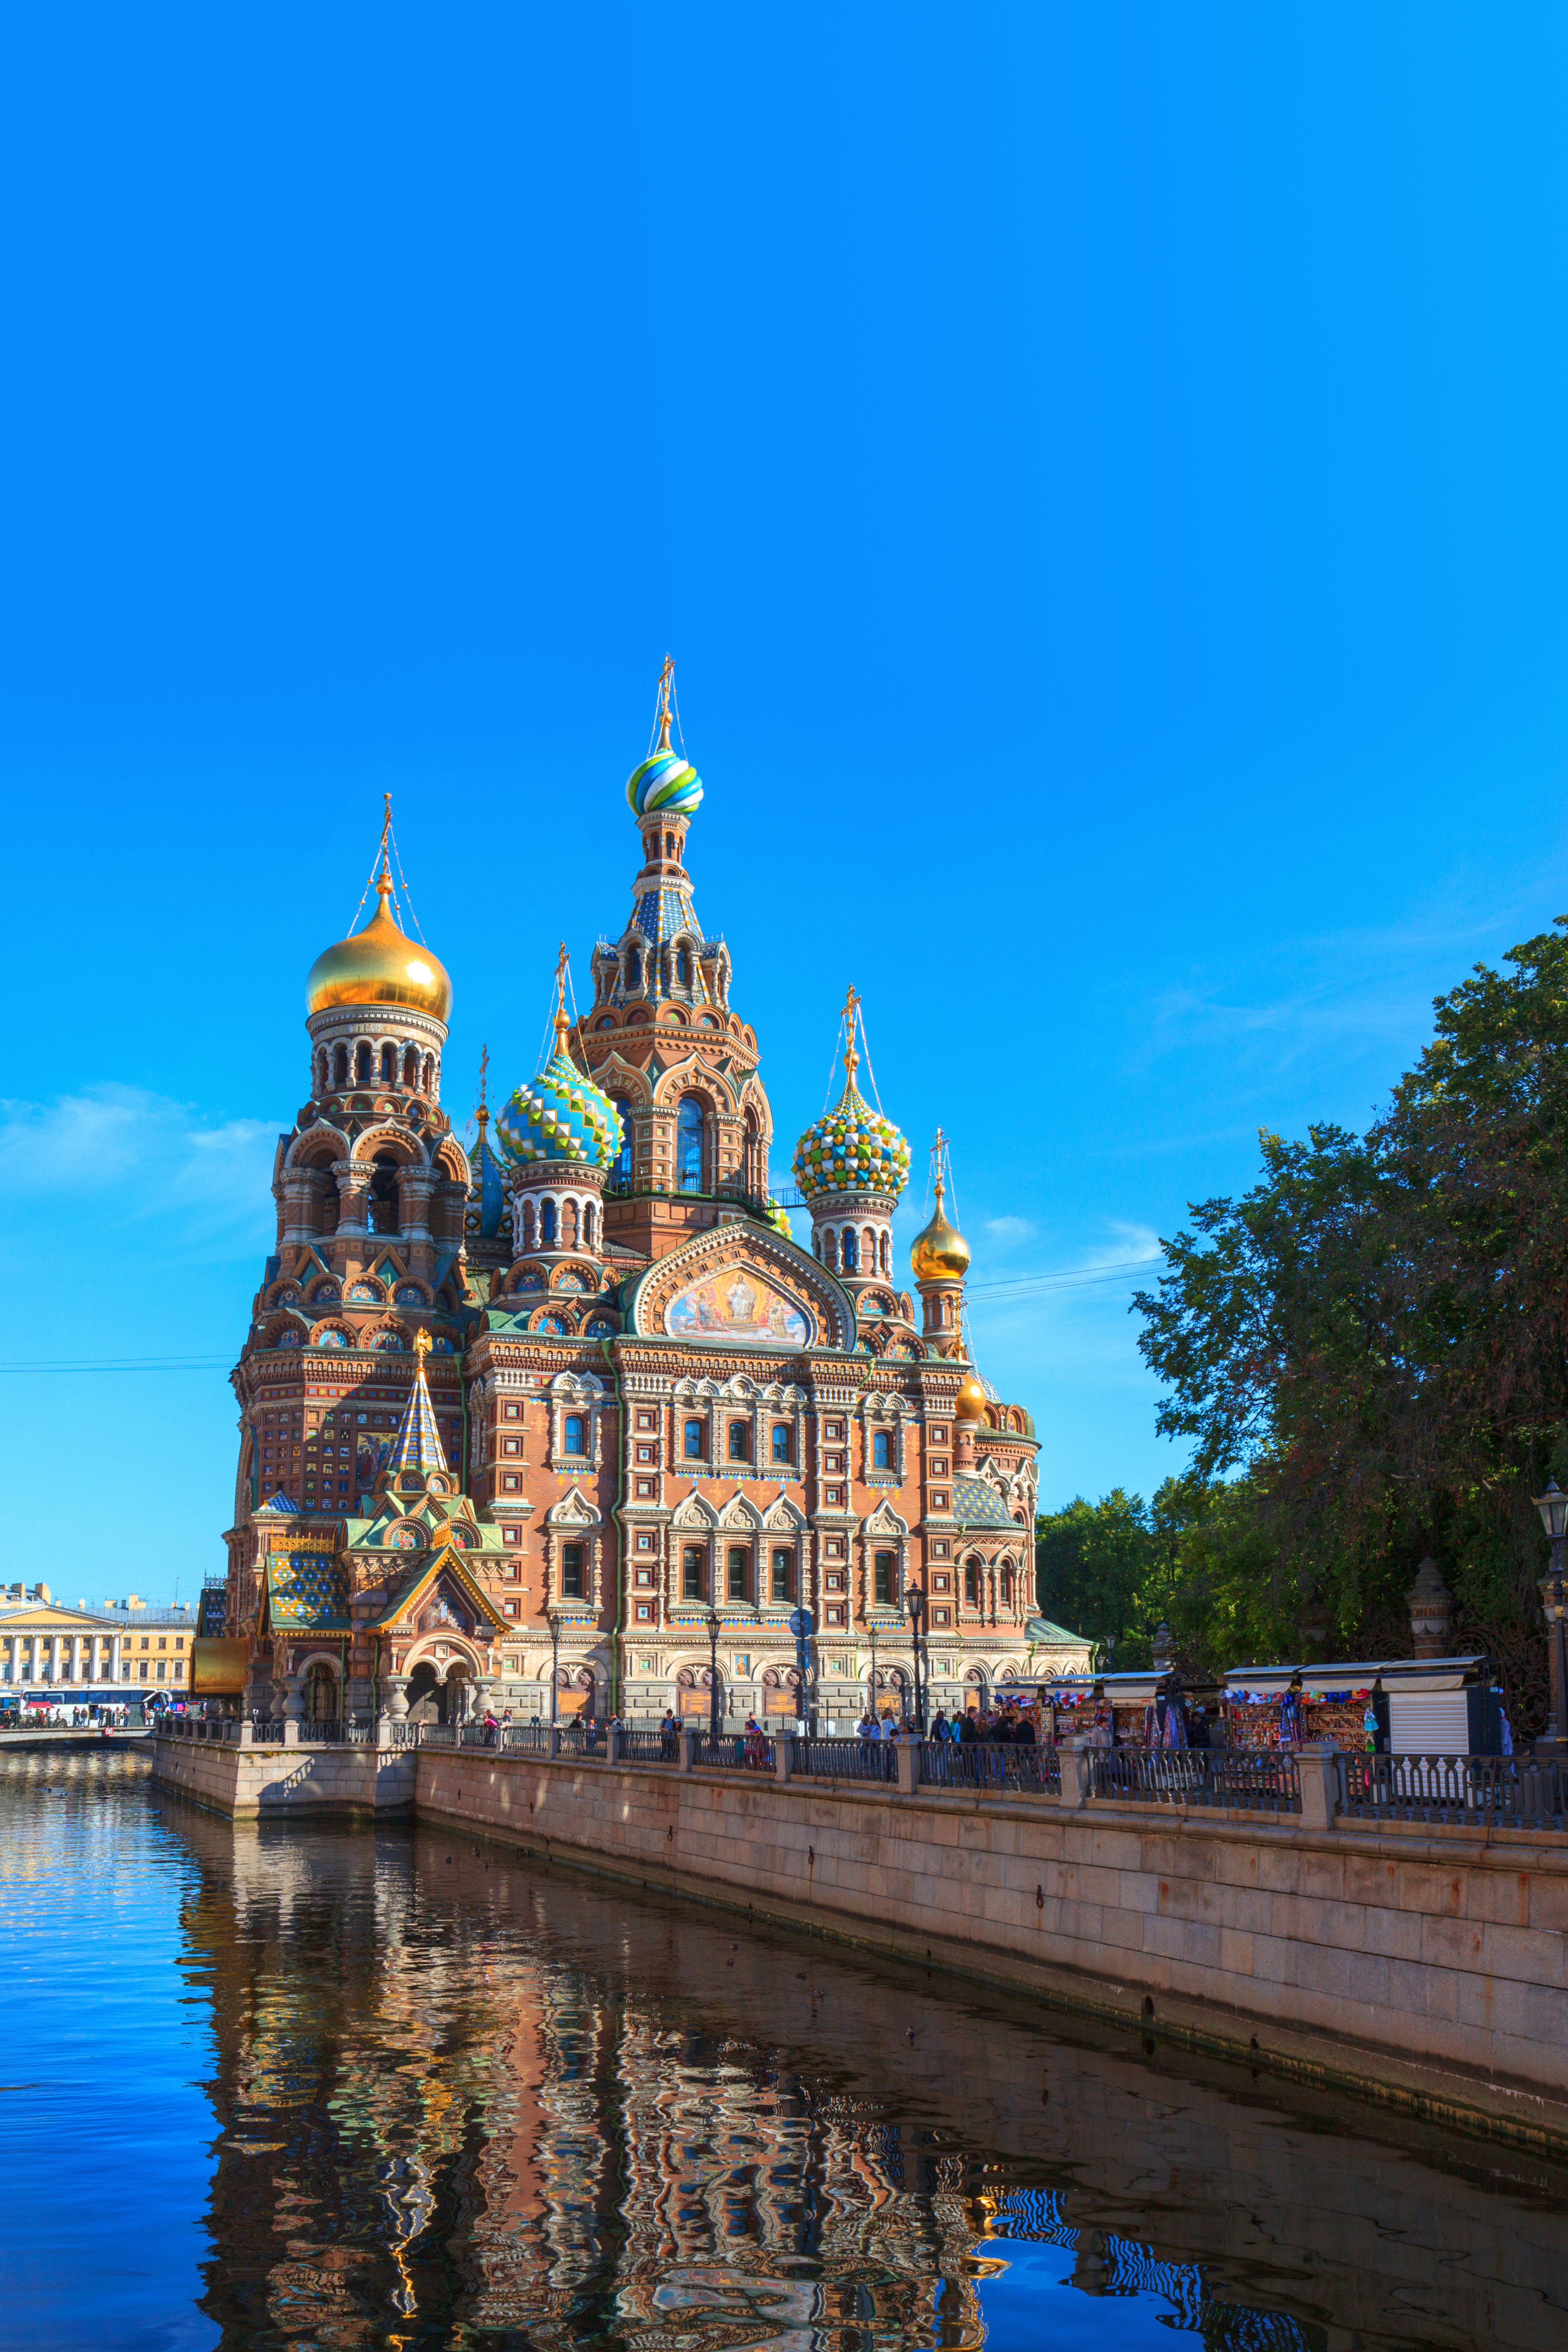 The colourful spires and golden domes of St Petersburg's Church of the Saviour on the Spilled Blood, against a clear blue sky